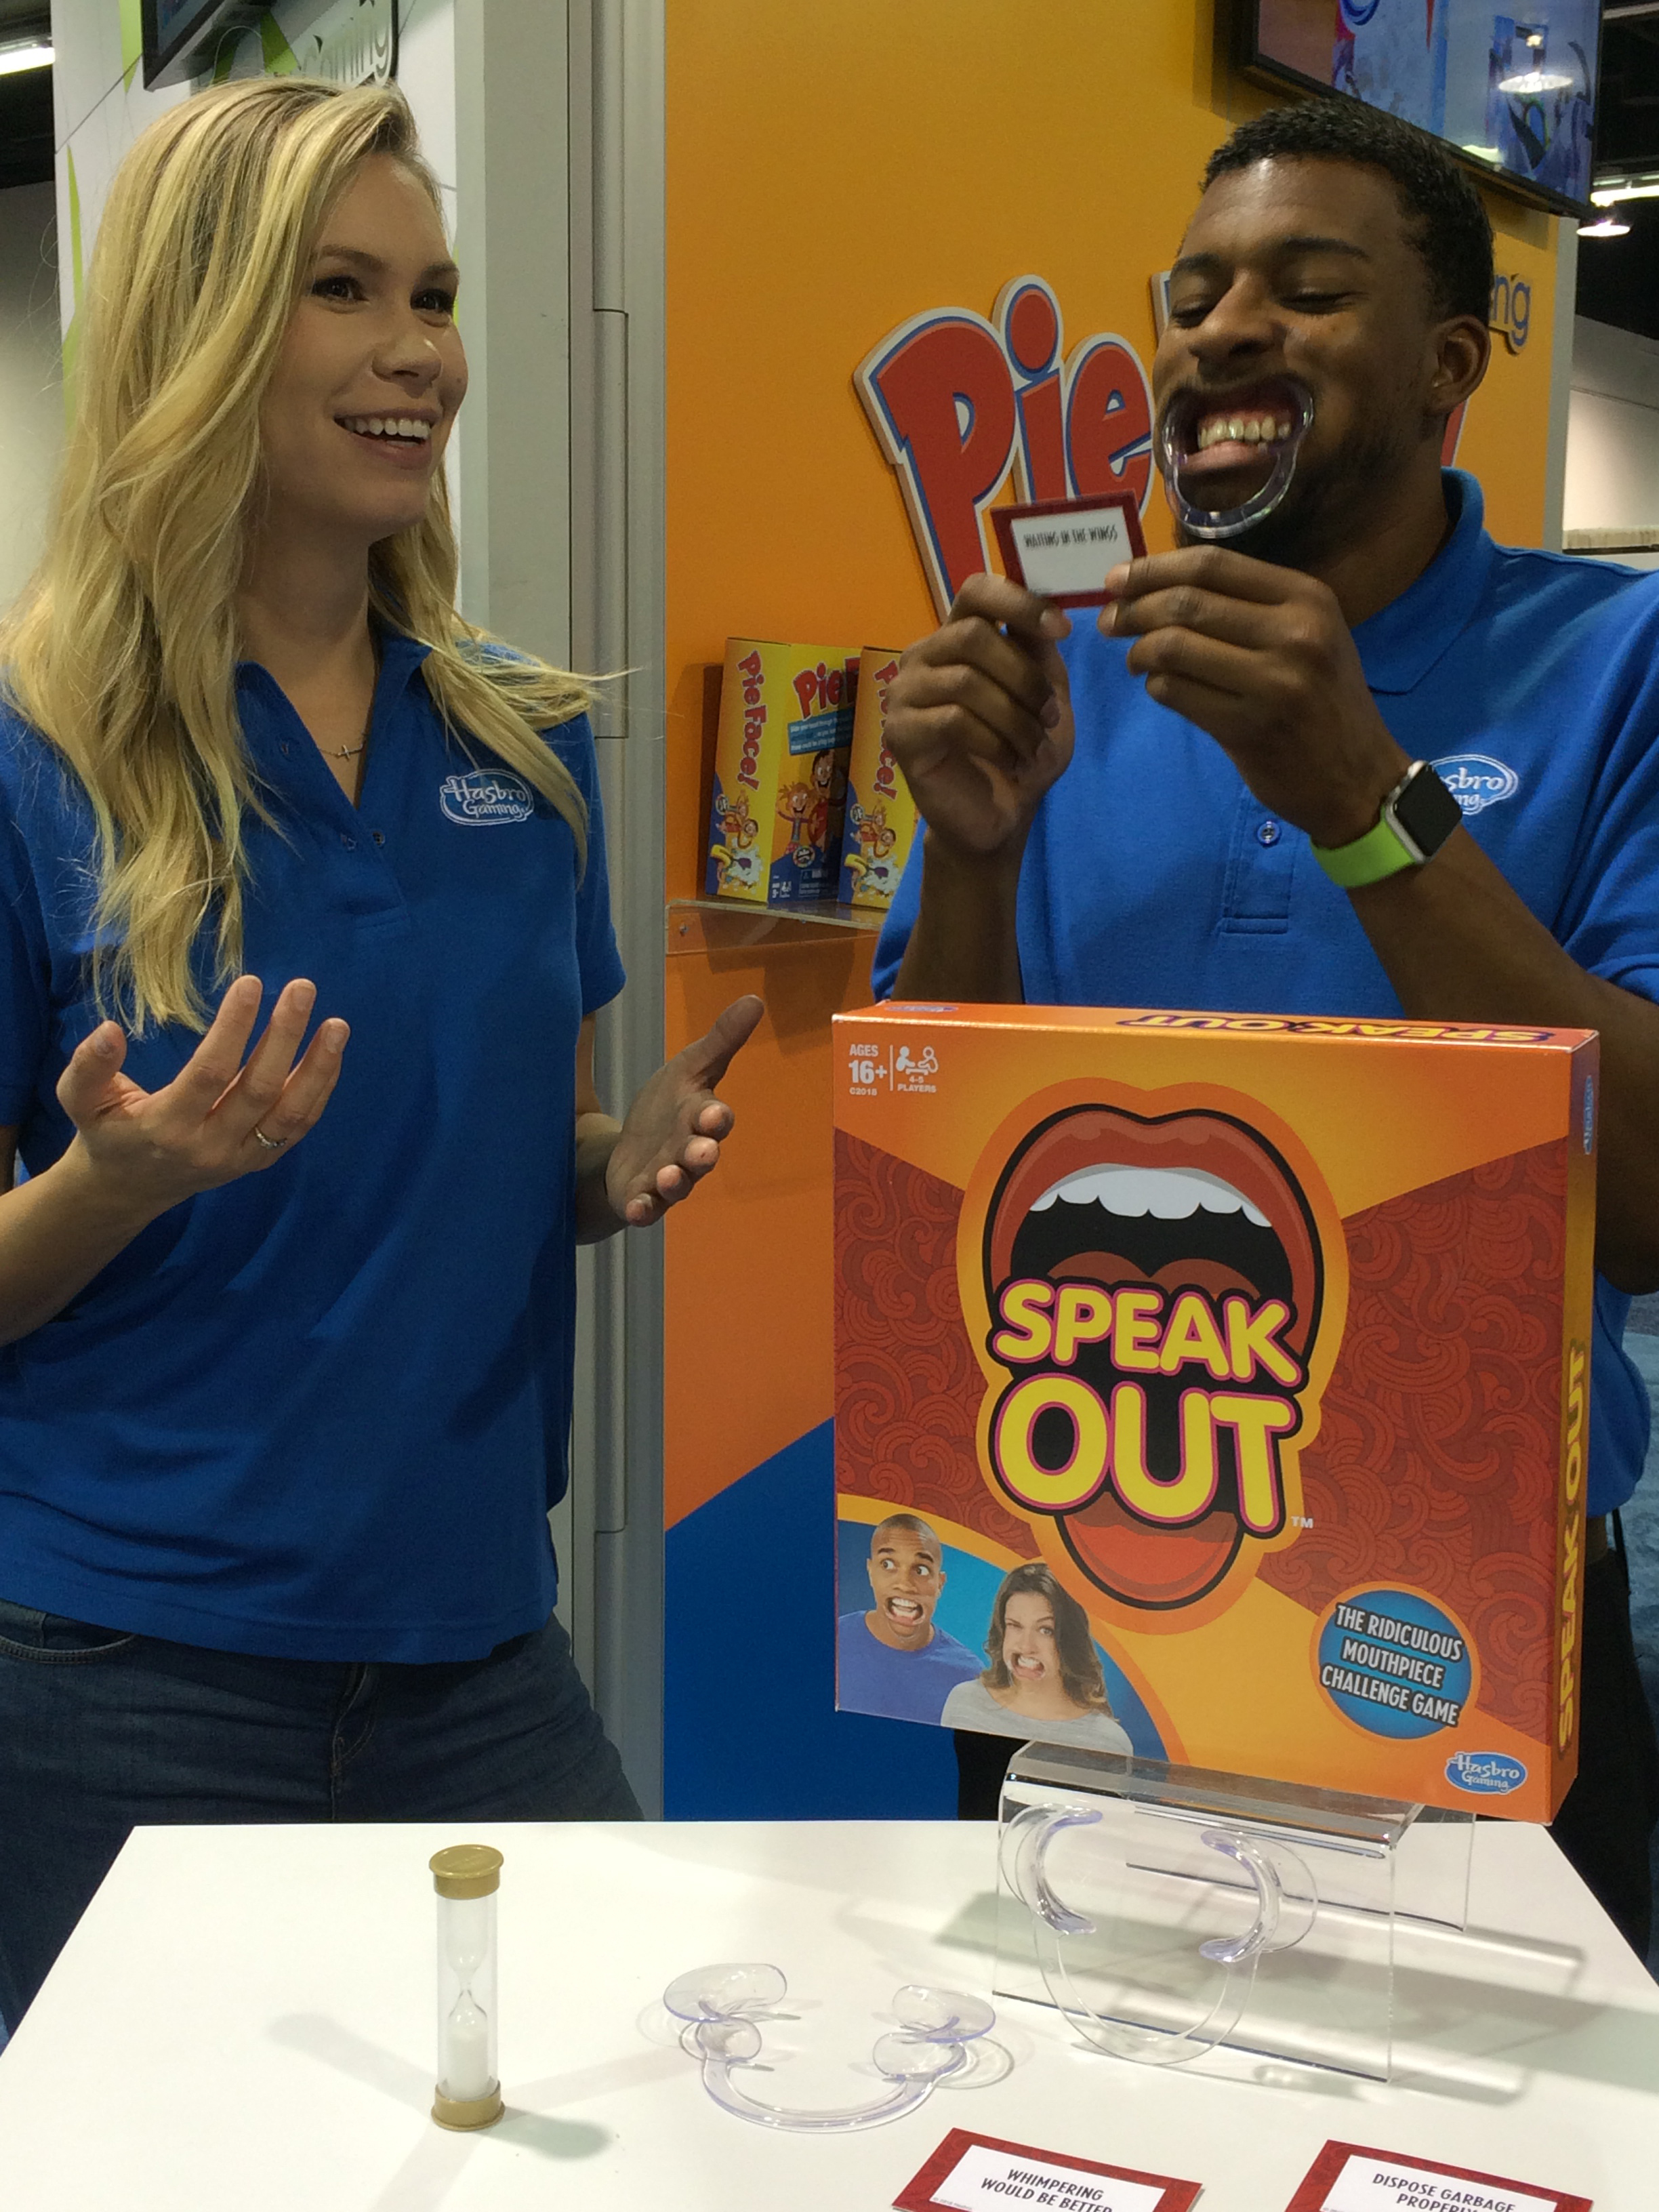 Namaak Dom Kijkgat Hasbro Brings Mouth Piece Challenge to the Masses with New SPEAK OUT Game |  Business Wire